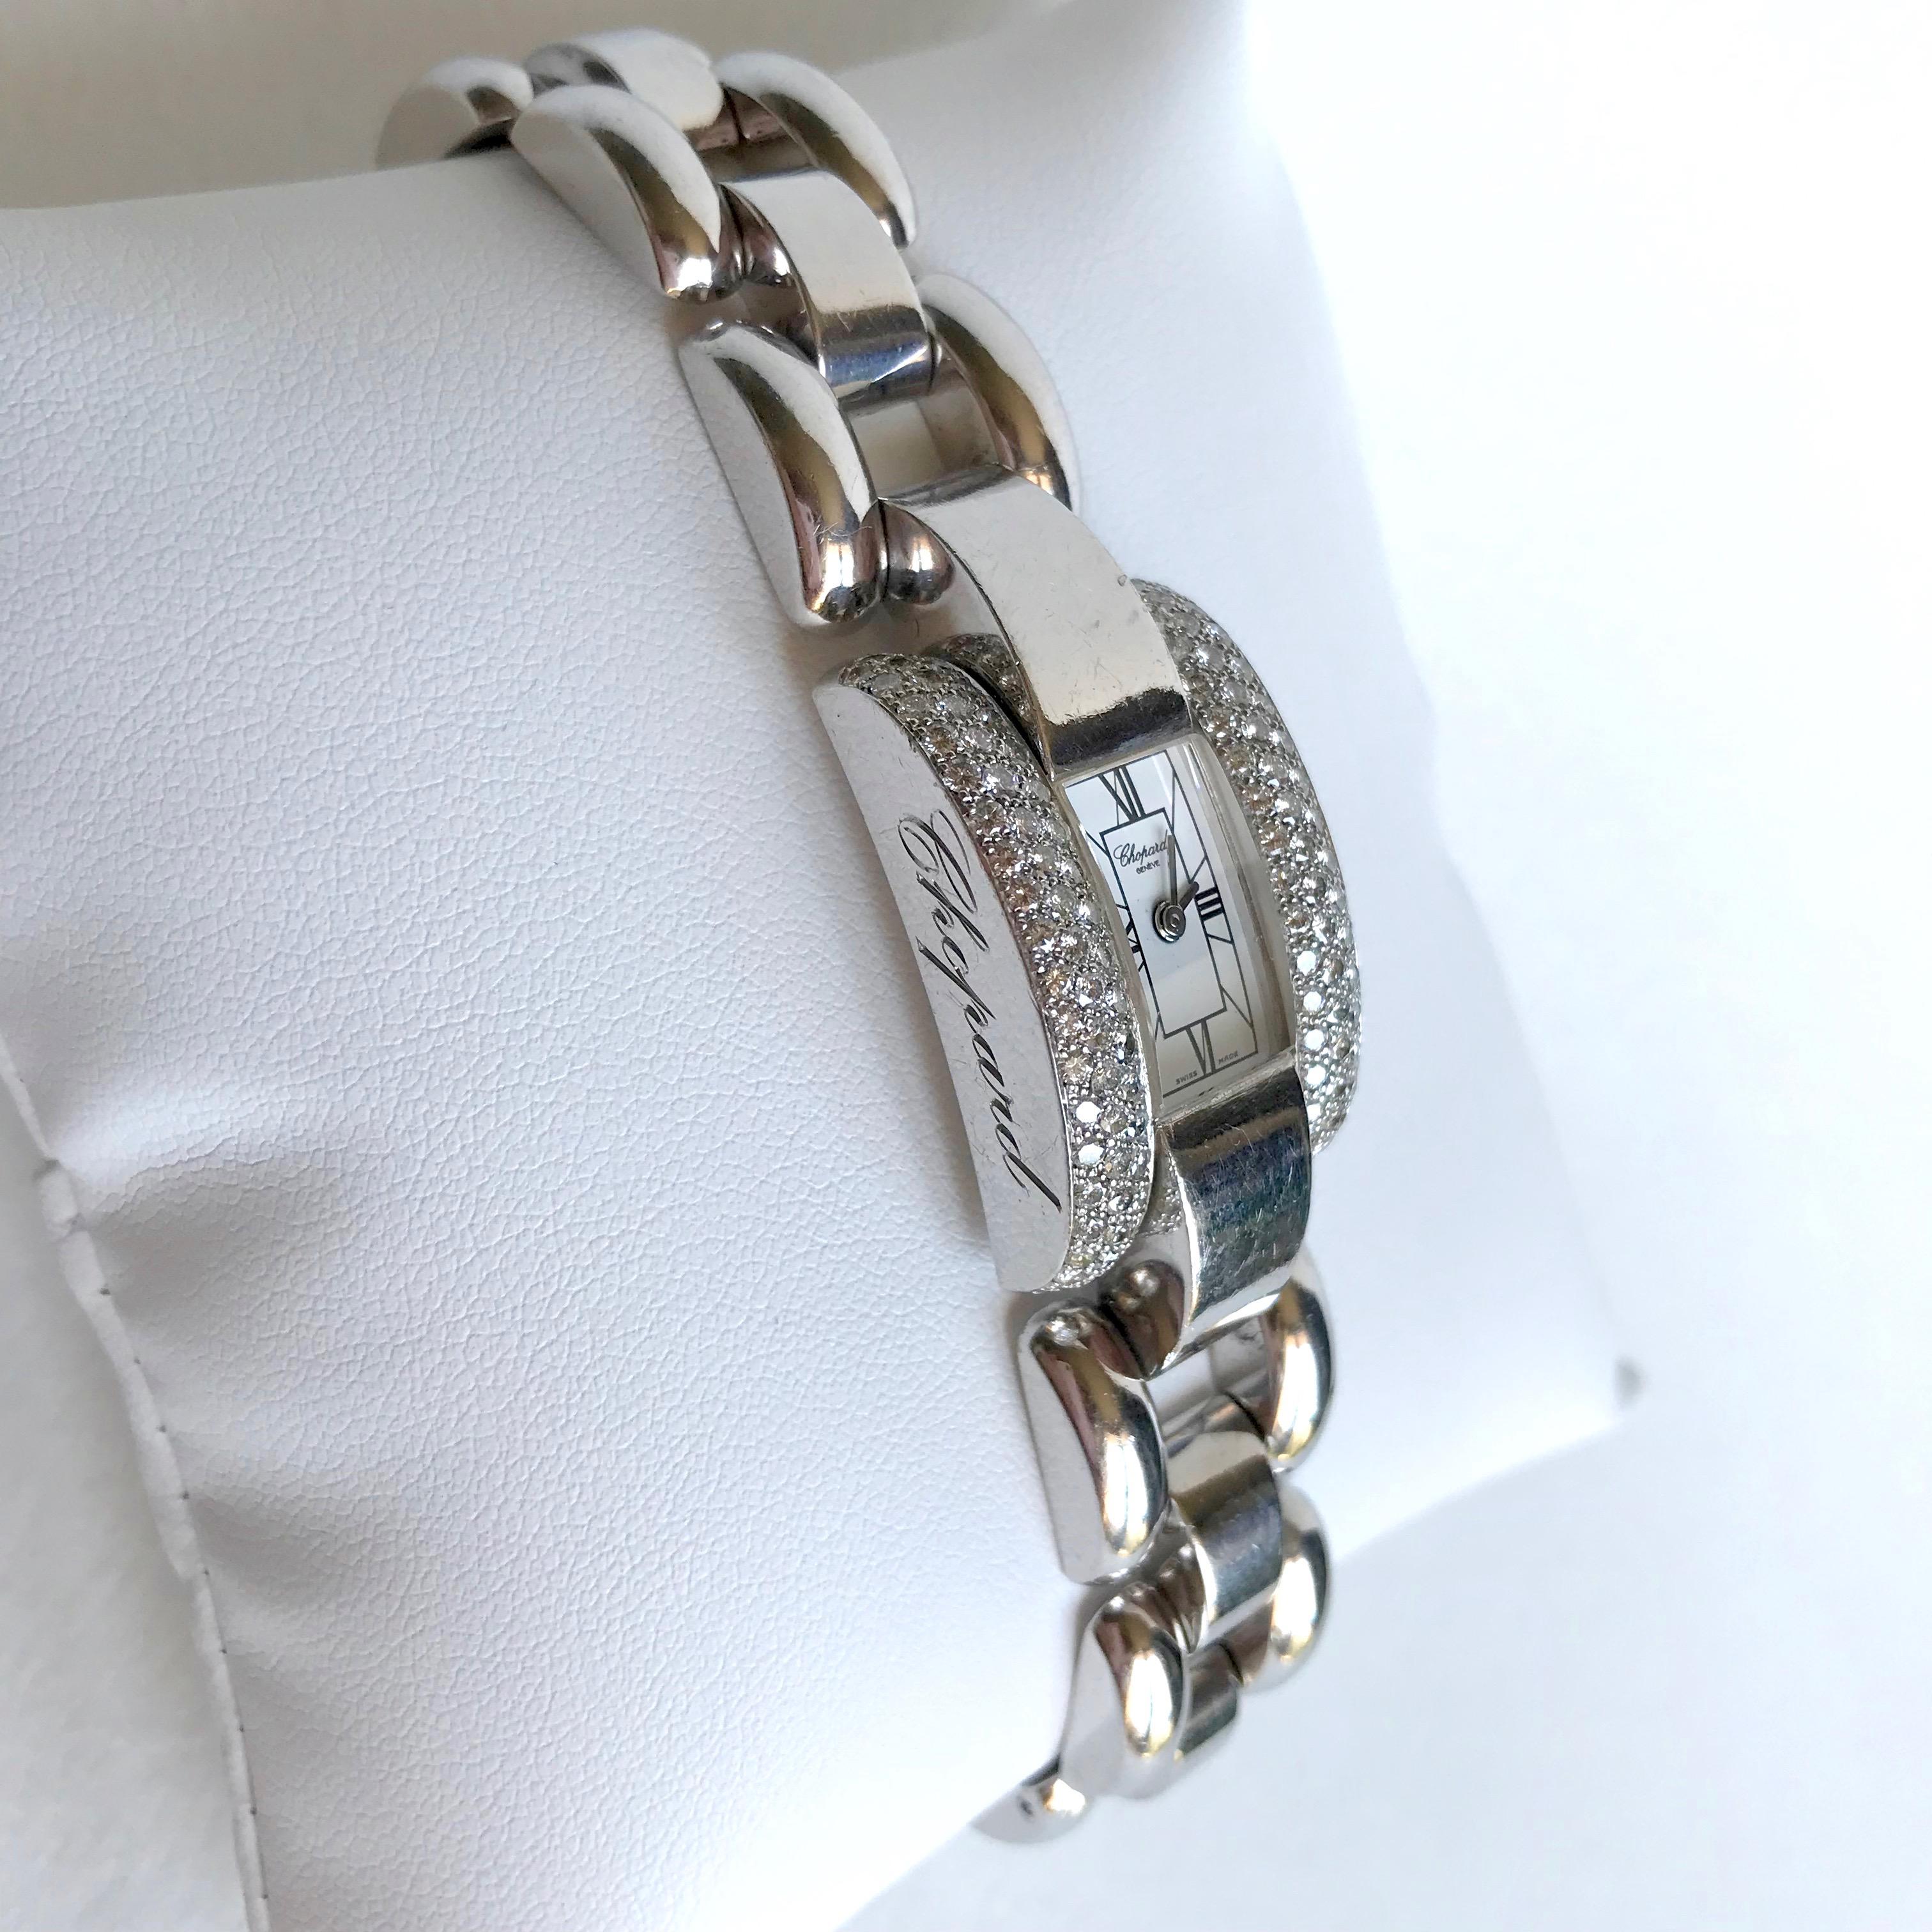 Woman's wristwatch in 18K white GOLD and diamonds from the house of CHOPARD, La Strada model. 
Mechanical movement, working. Roman numerals dial. White gold case with bezel adorned with 116 diamonds (18mm x 43mm) for 1.90 carats 
Signed and